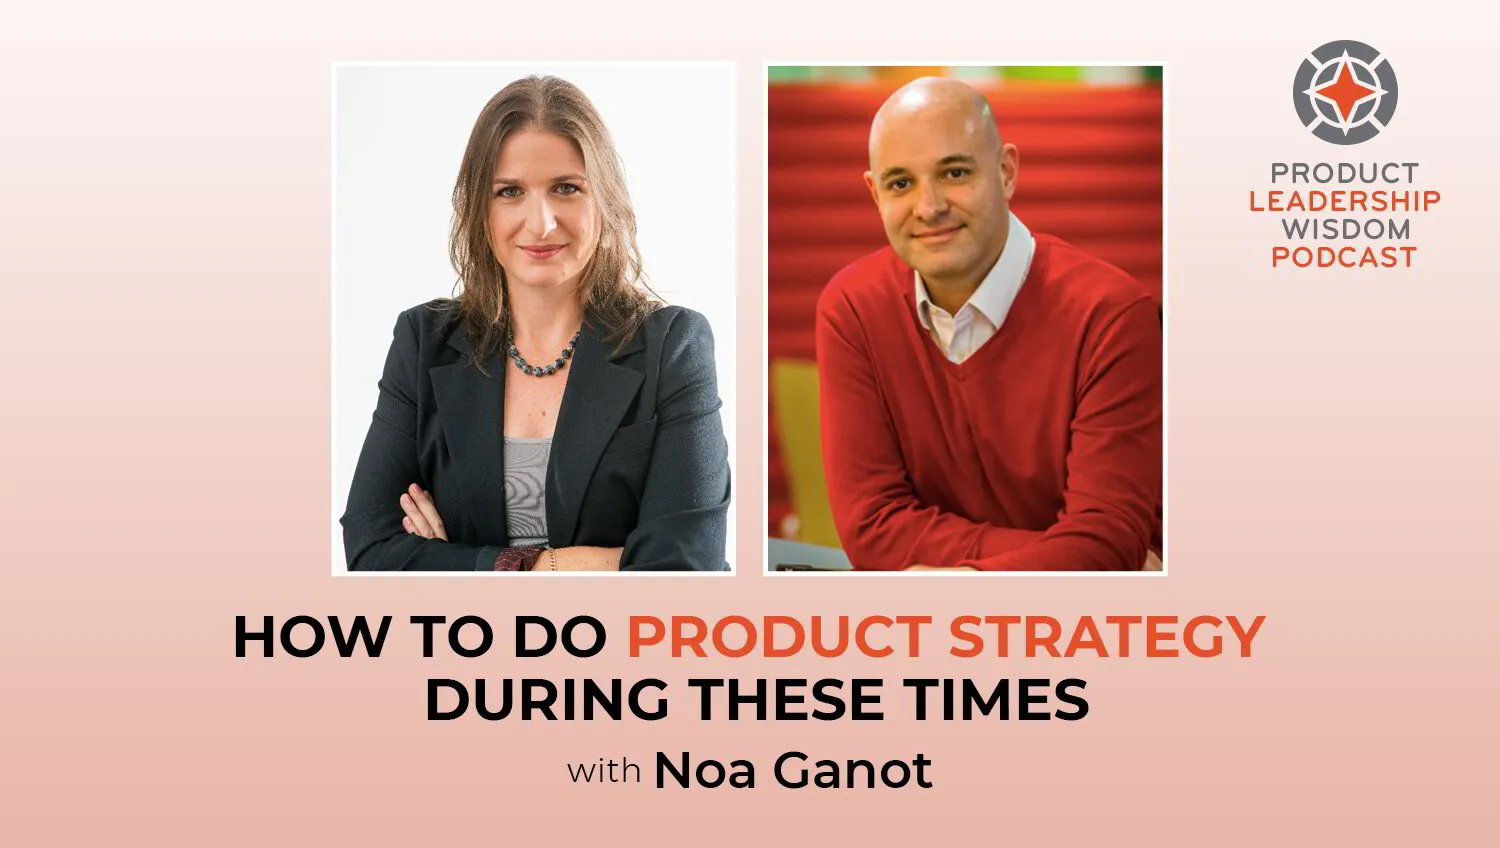 How to Do Product Strategy During These Times with Noa Ganot